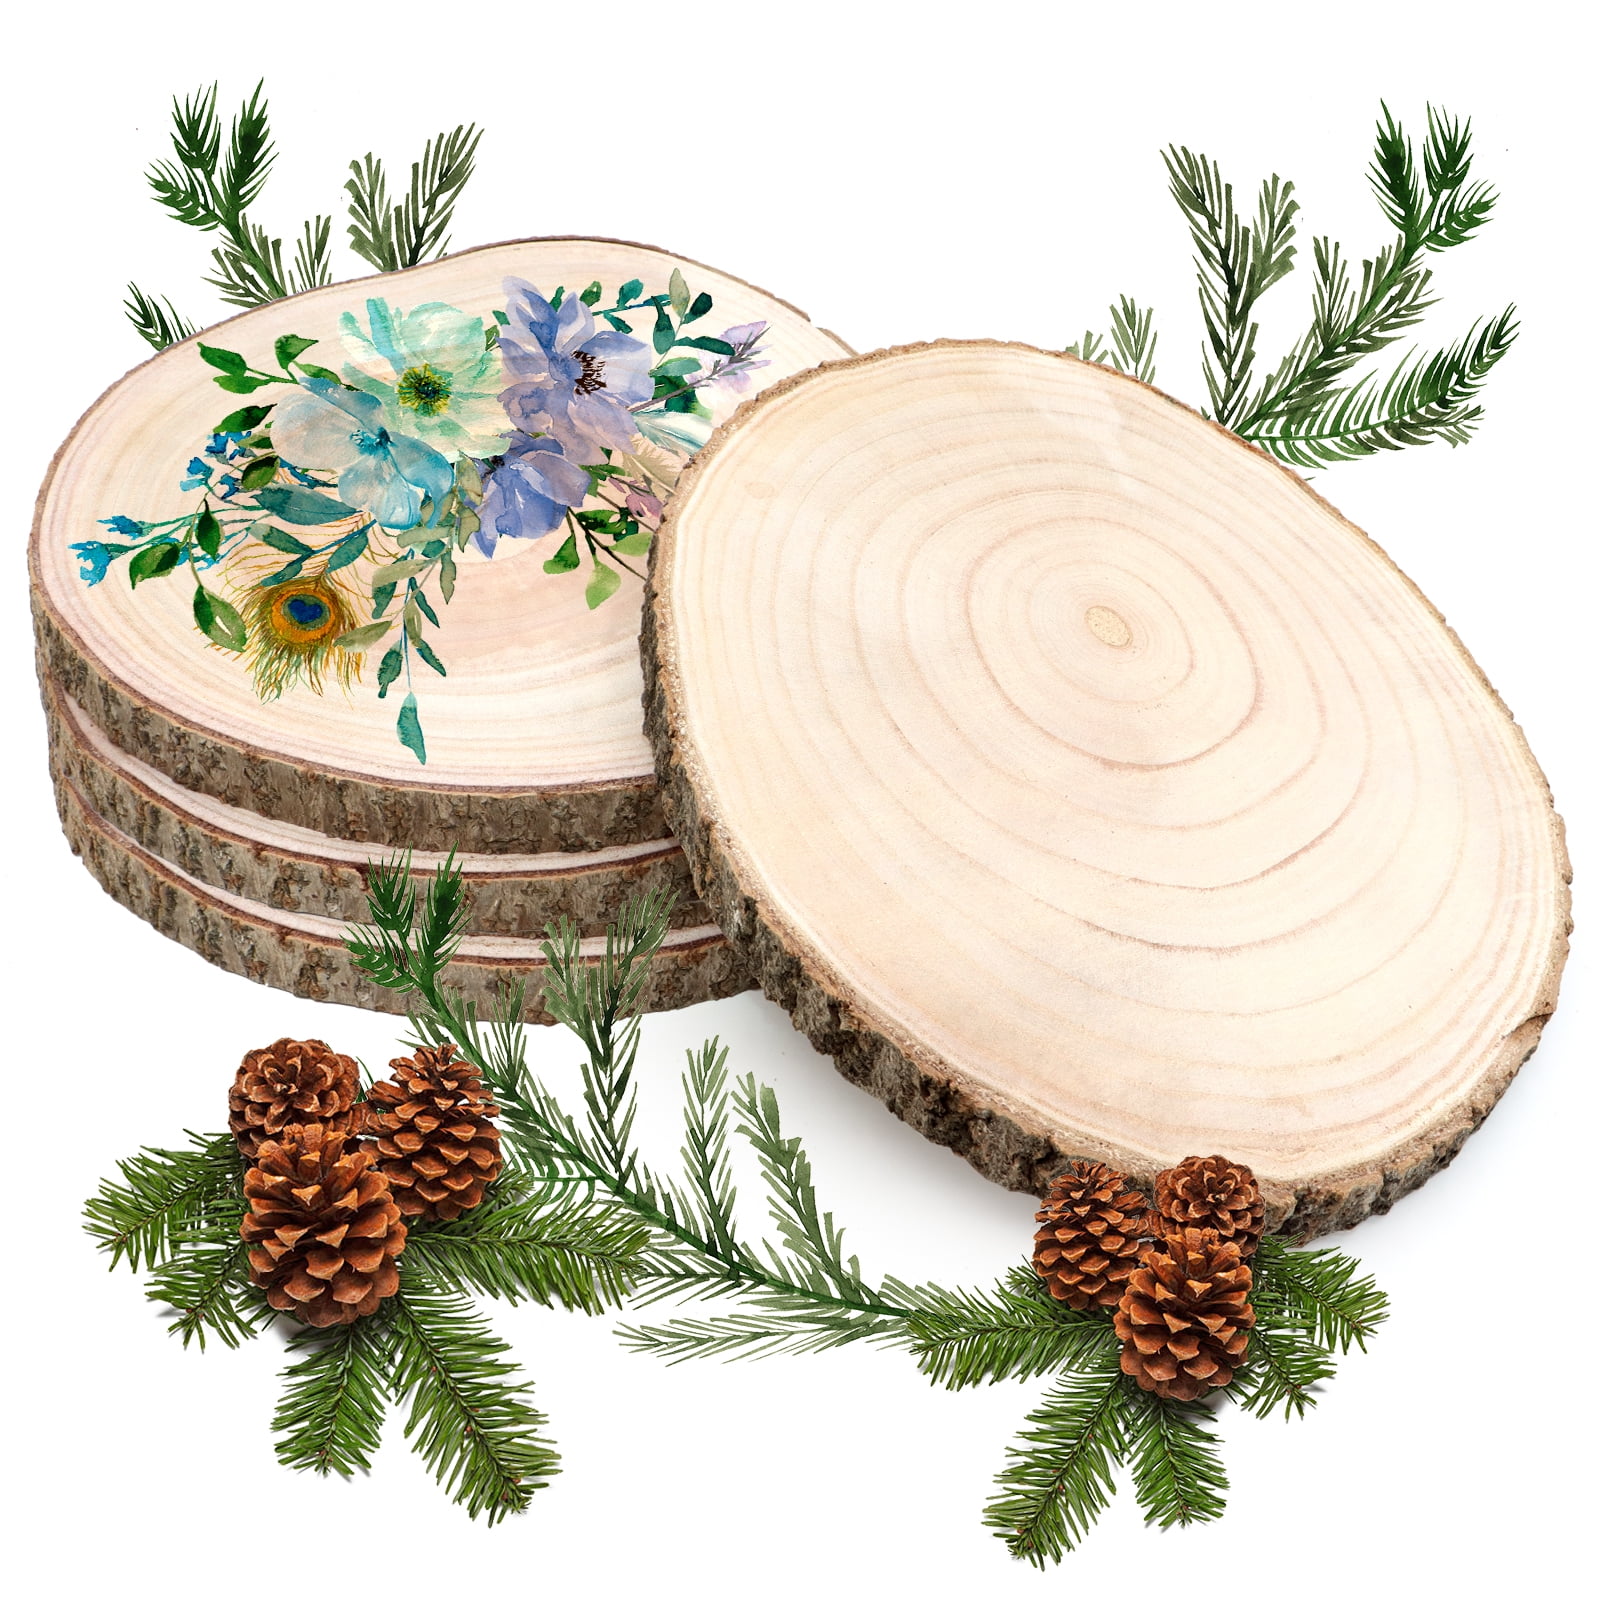 Sancodee 8 Pcs Large Unfinished Wood Slices, 9-10 Inches Wood Slabs for  Centerpieces Natural Wooden Circle, DIY Wood Centerpieces for Tables  Wedding